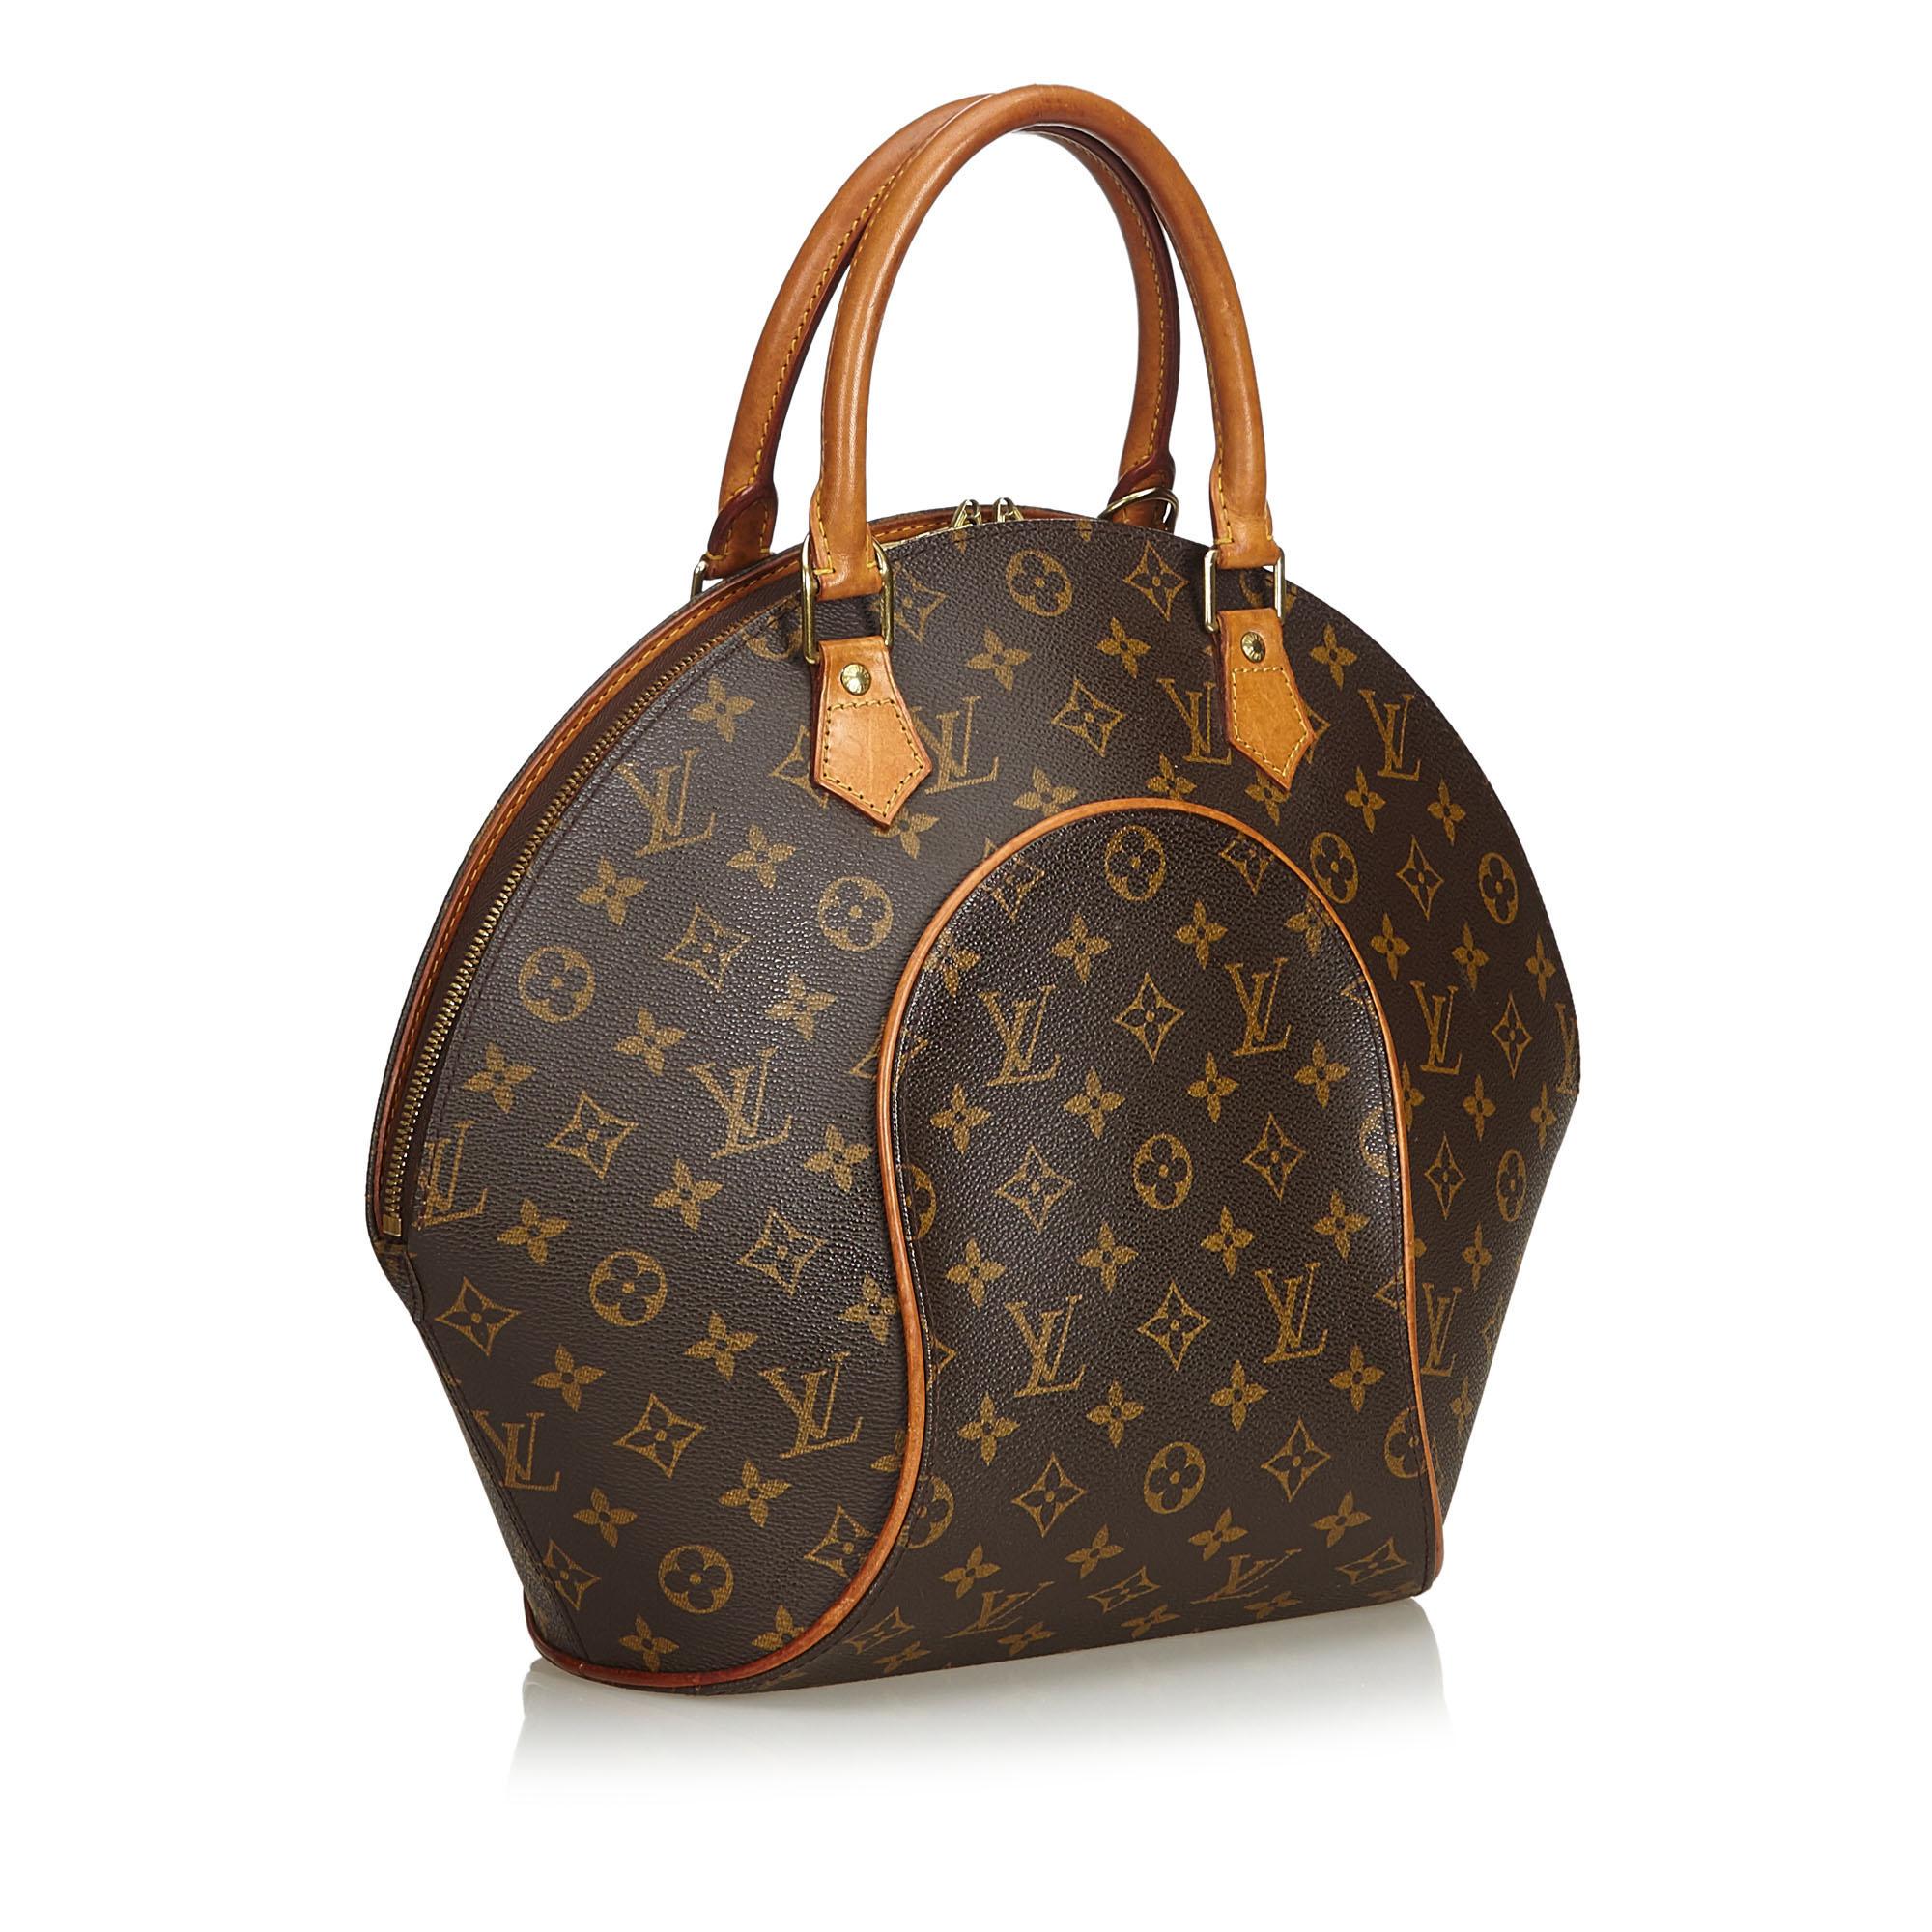 The Louis Vuitton Ellipse MM bowling bag features rolled vachetta handles, the classic LV Monogram canvas, vachetta trim, a top zip closure, an interior flat pocket, and a D-ring hardware.

Serial number: MI0959